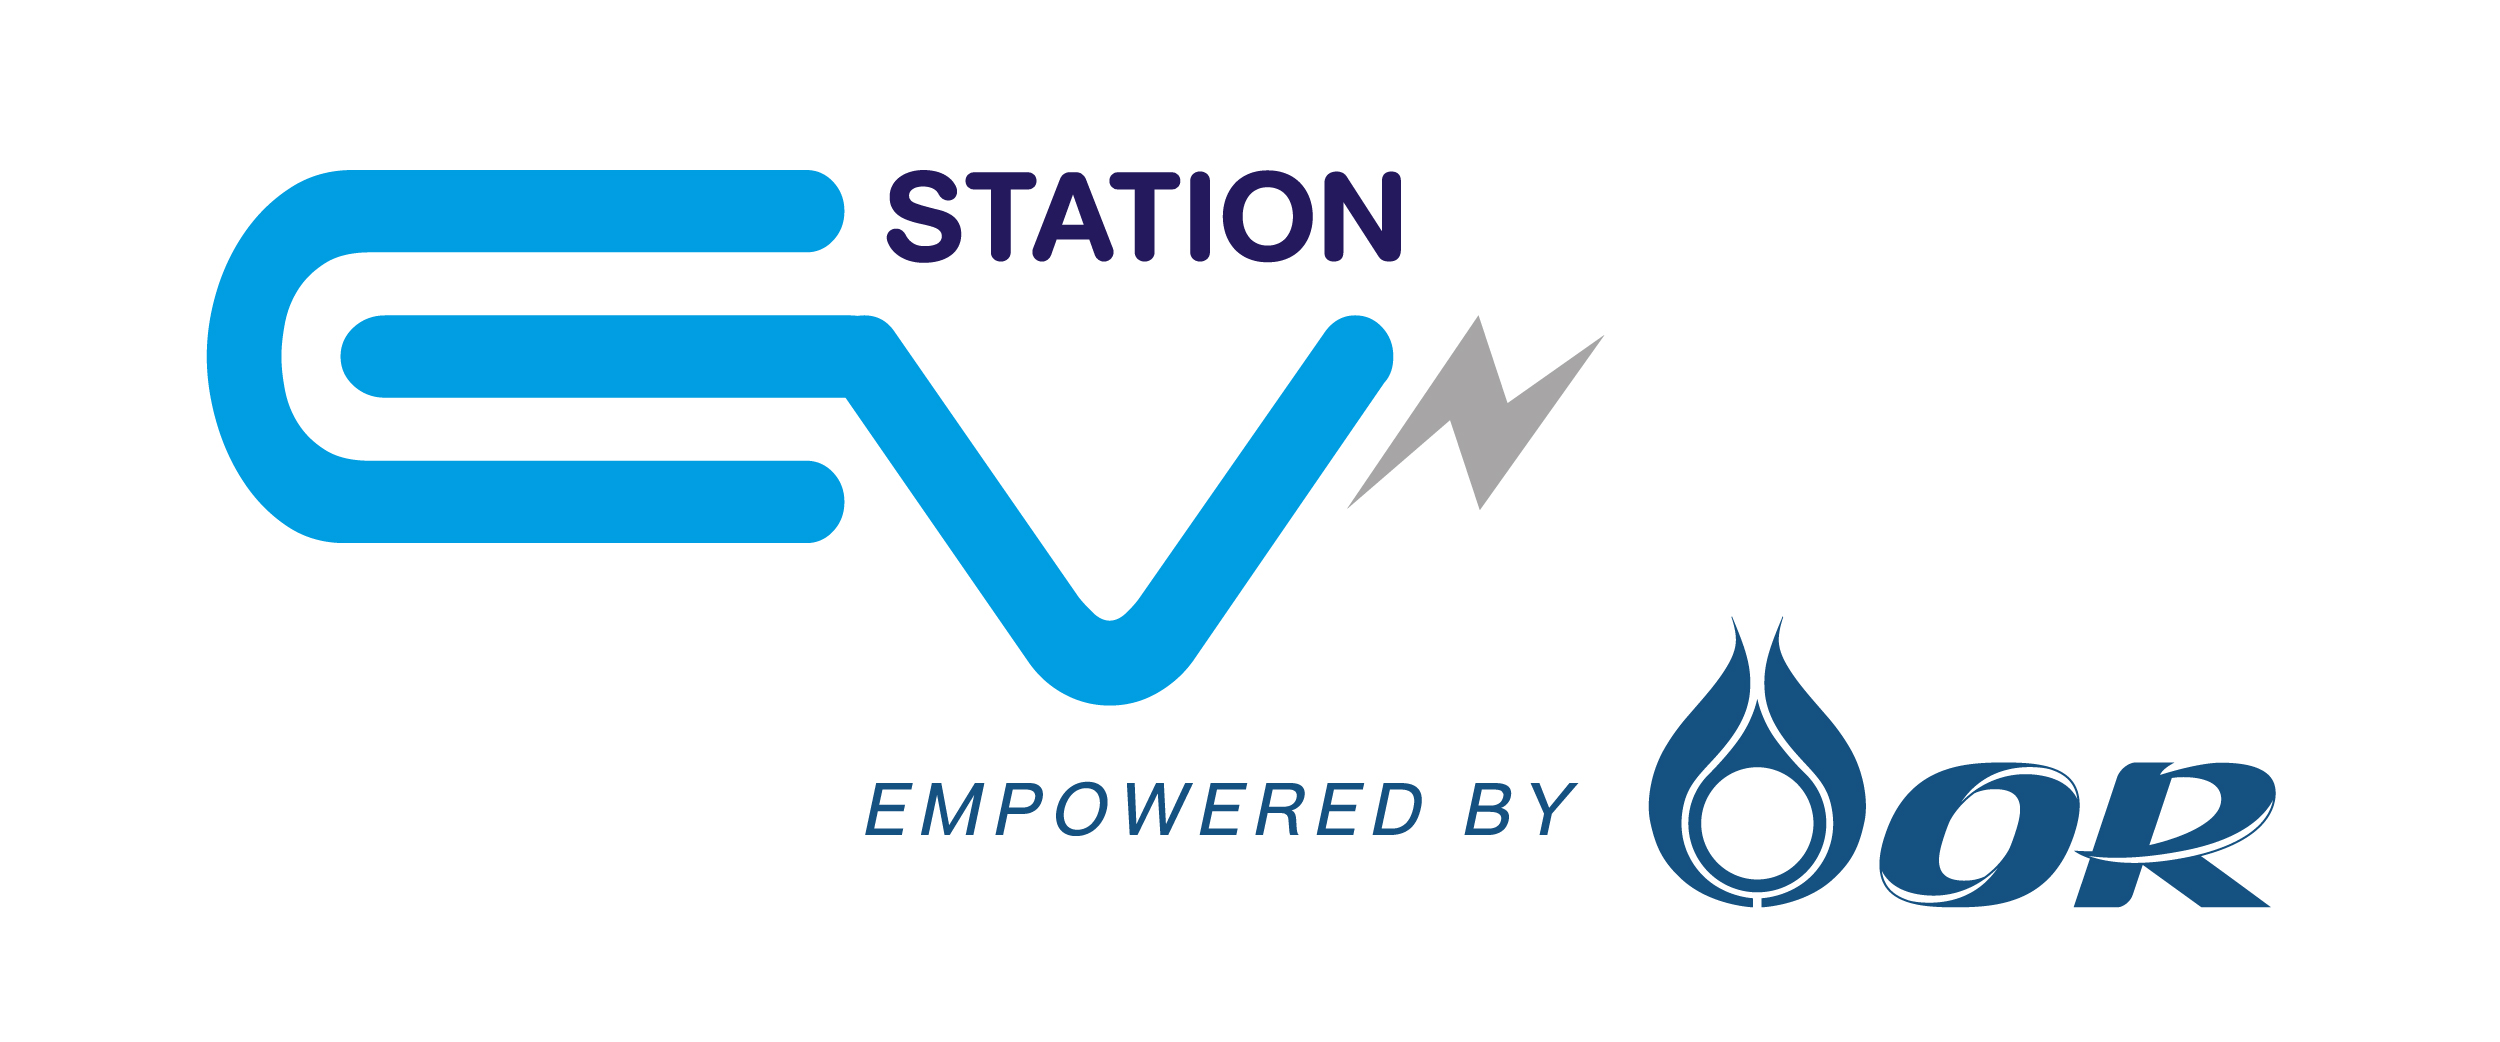 EV Station empowered by OR